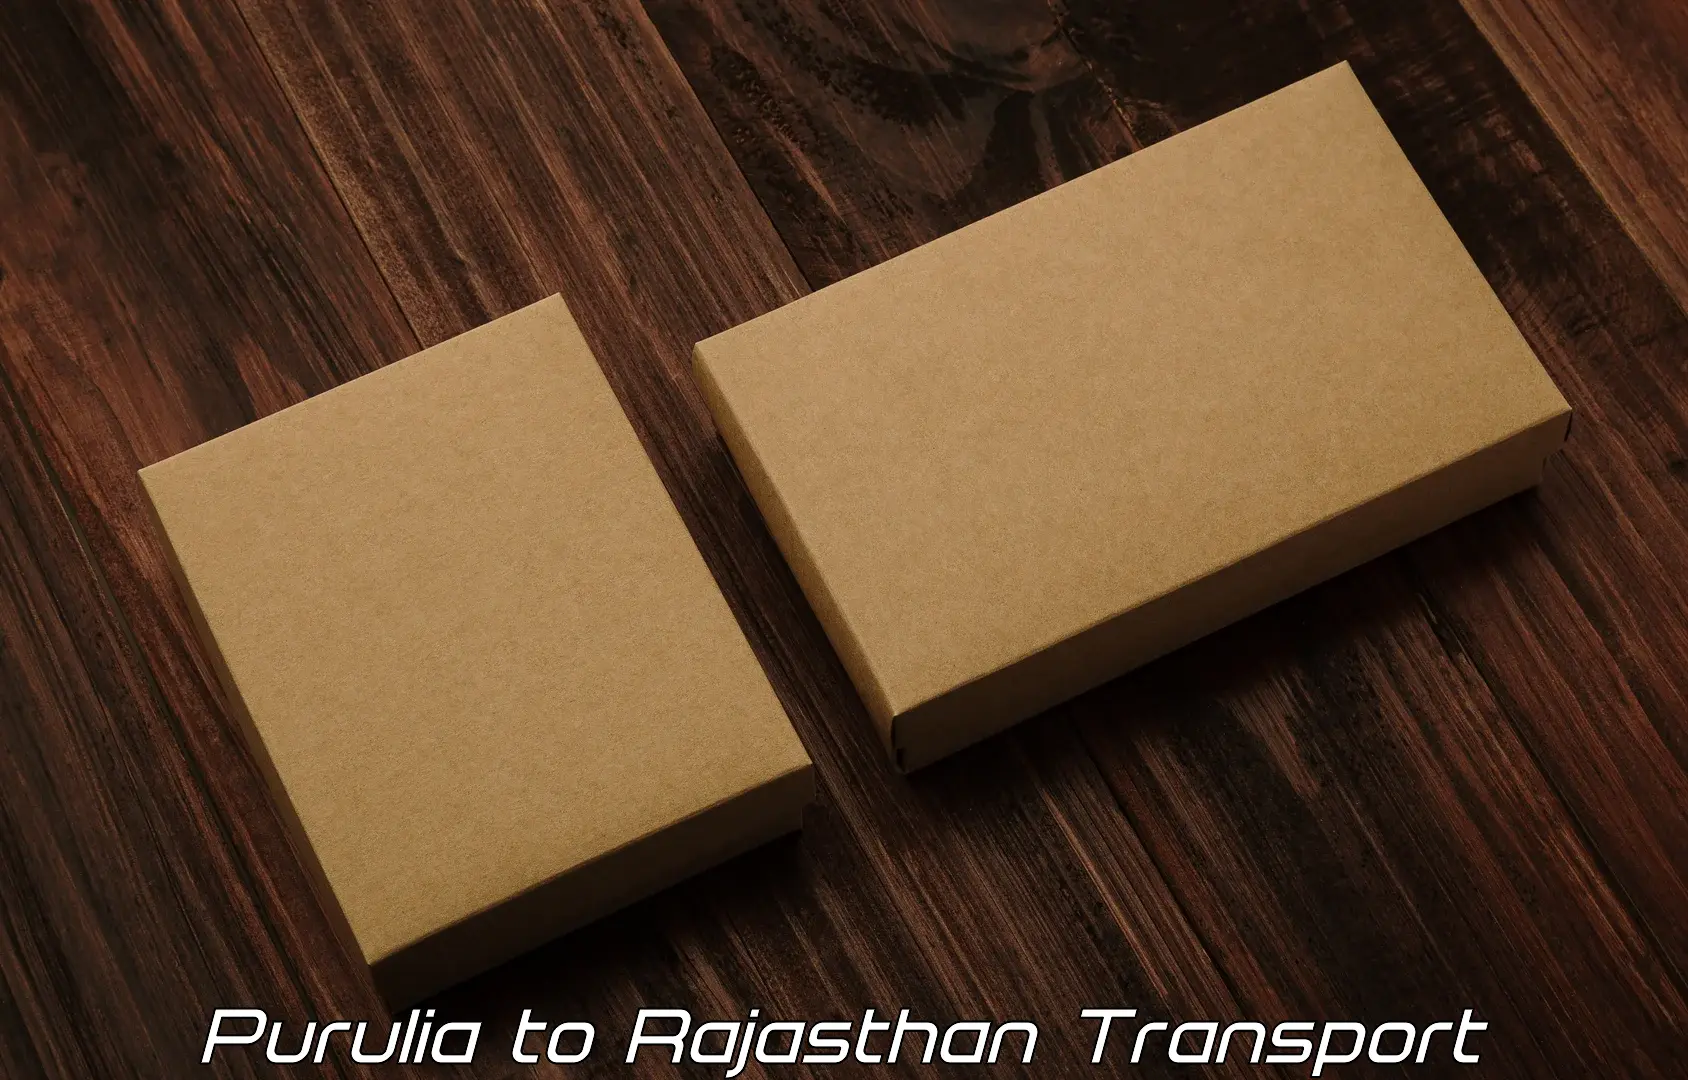 Truck transport companies in India Purulia to Rajasthan